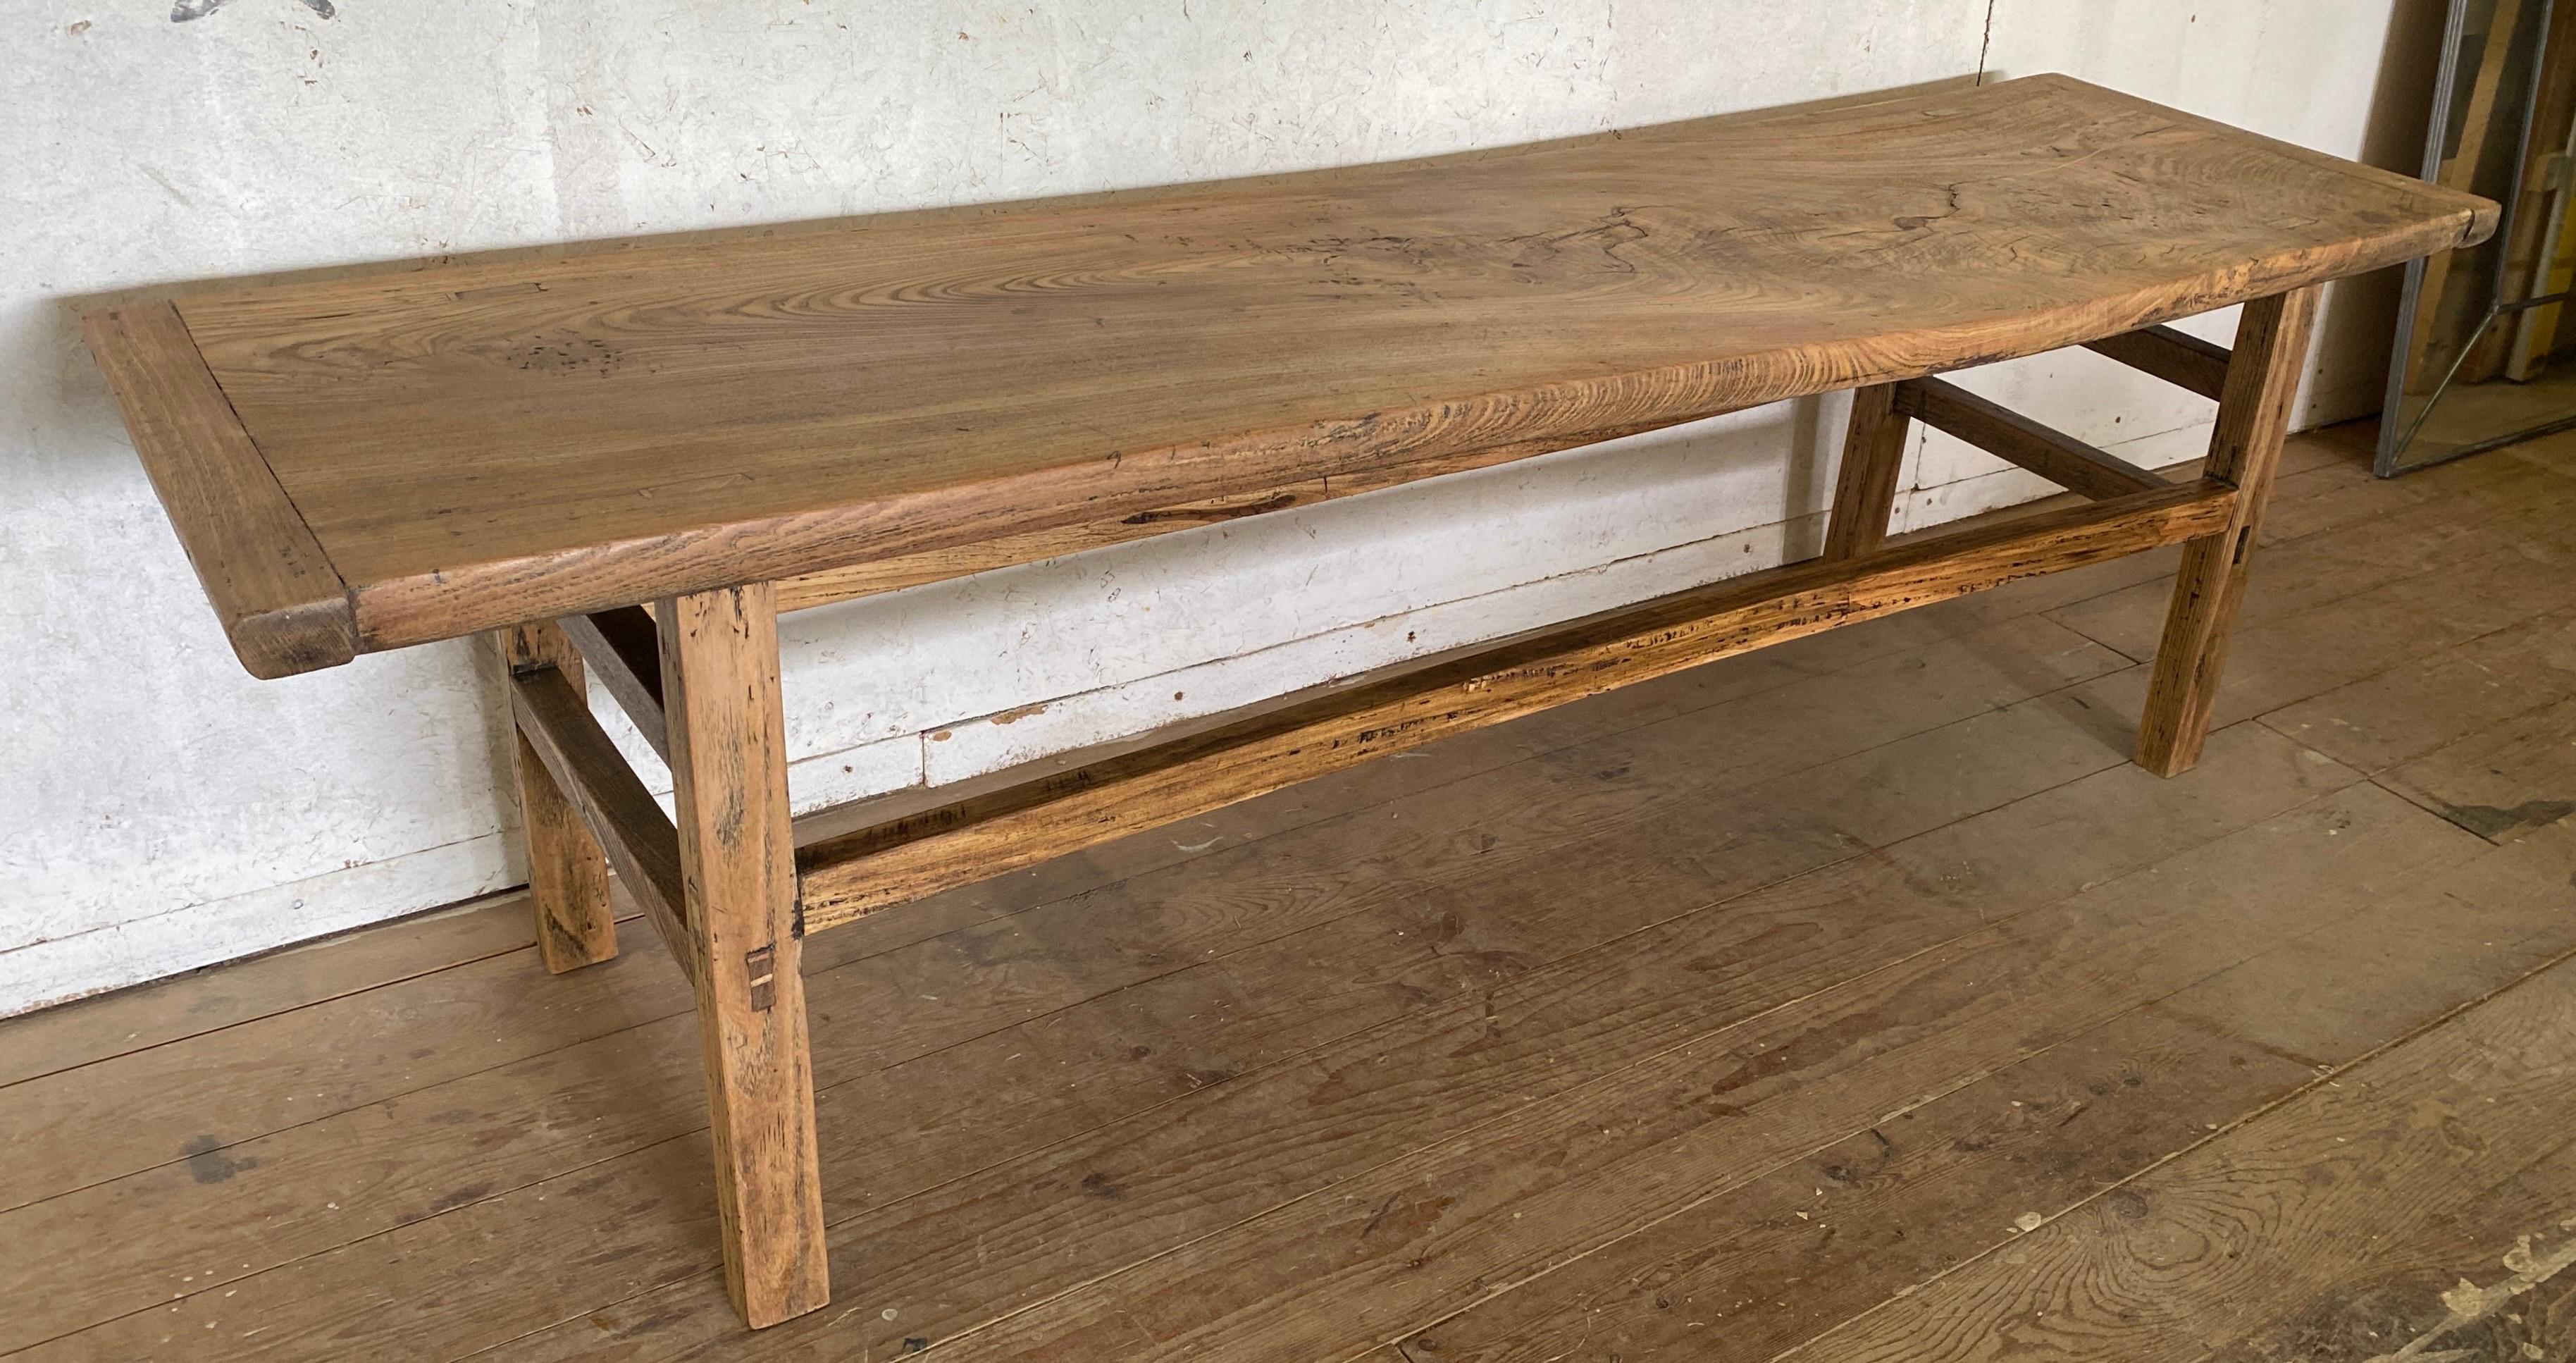 Rustic Asian Plank Top Coffee Table or Bench In Good Condition For Sale In Sheffield, MA